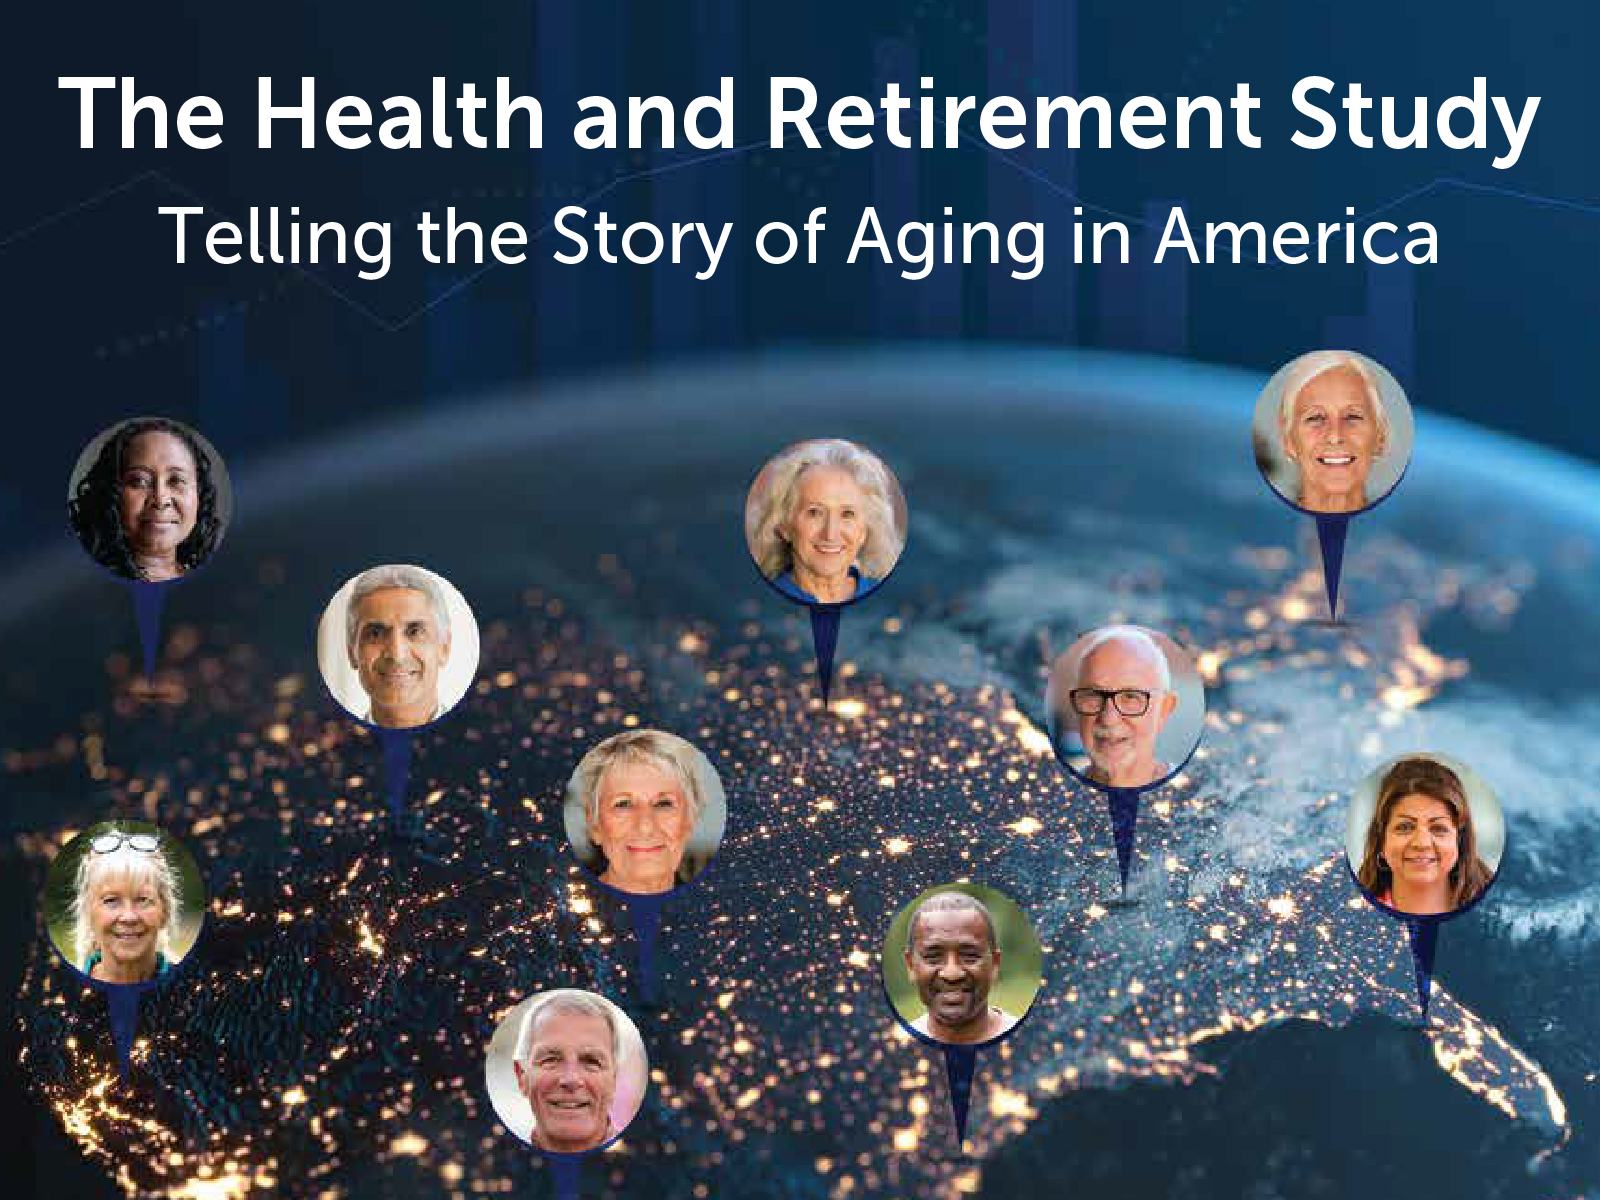 The Health and Retirement Study: Telling the Story of Aging in America